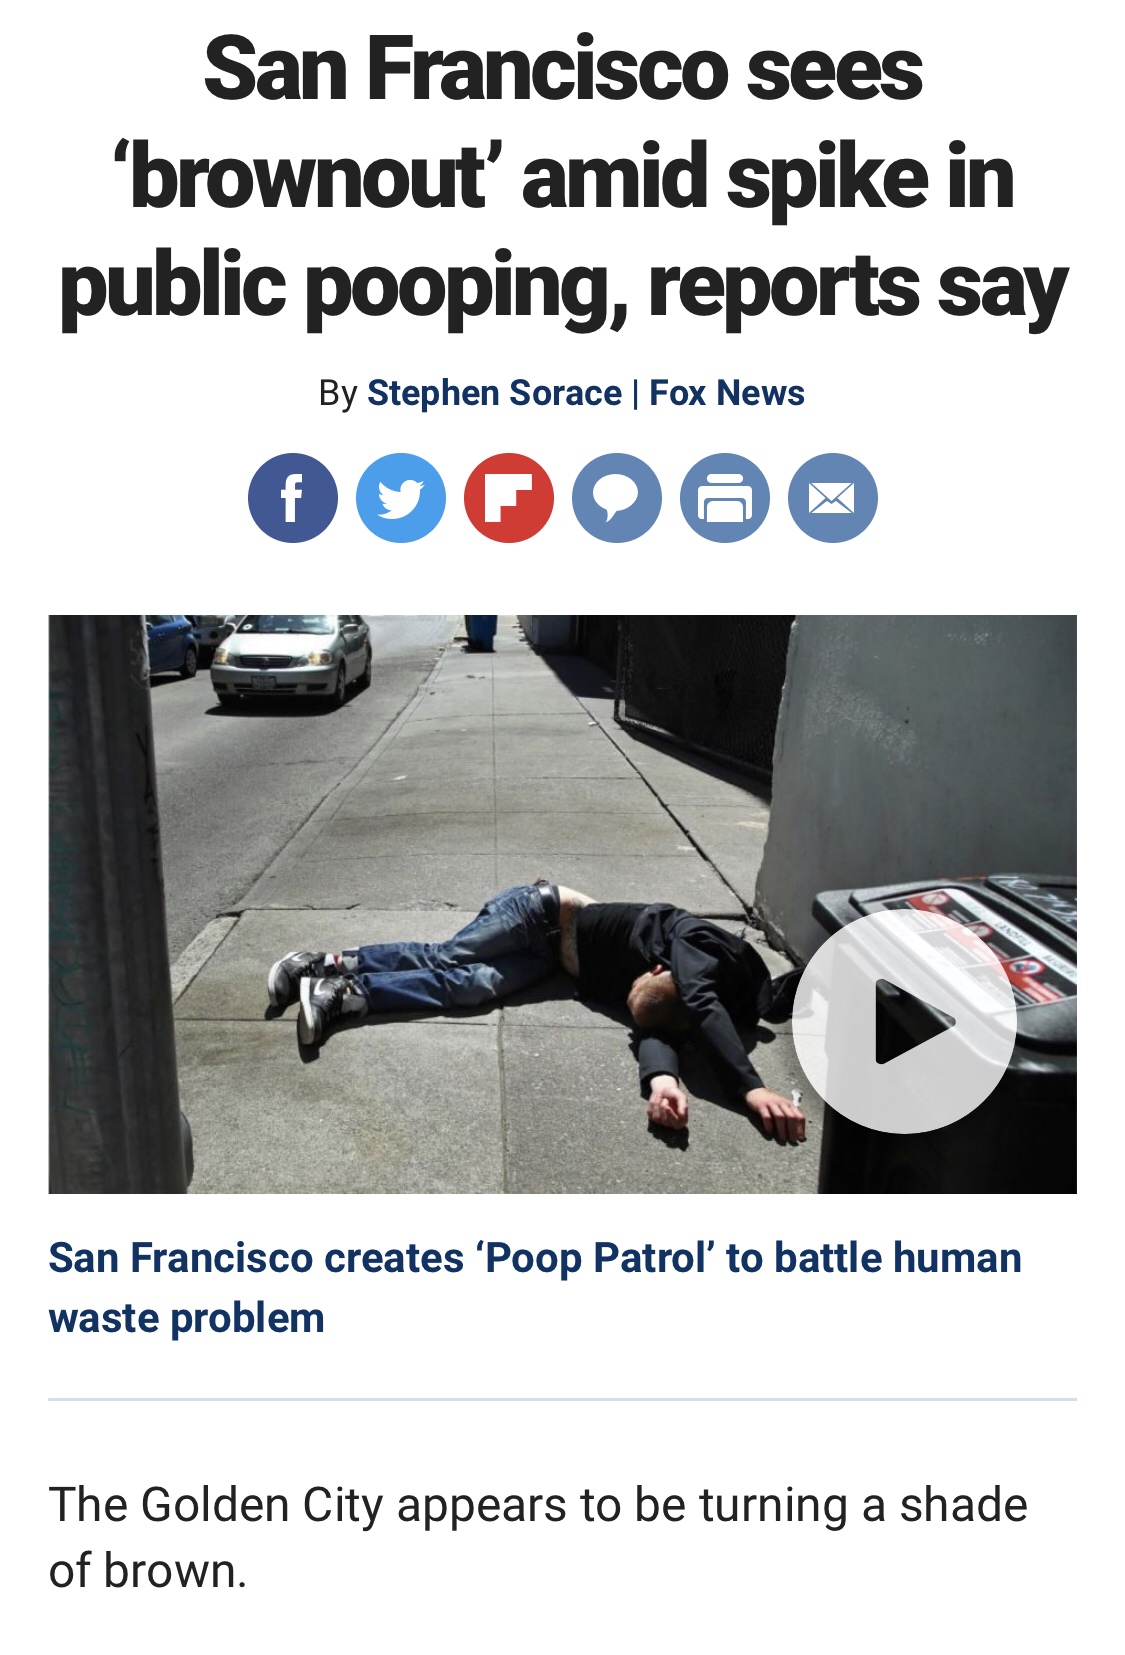 california feces meme - San Francisco sees 'brownout' amid spike in public pooping, reports say By Stephen Sorace | Fox News San Francisco creates 'Poop Patrol' to battle human waste problem The Golden City appears to be turning a shade of brown.